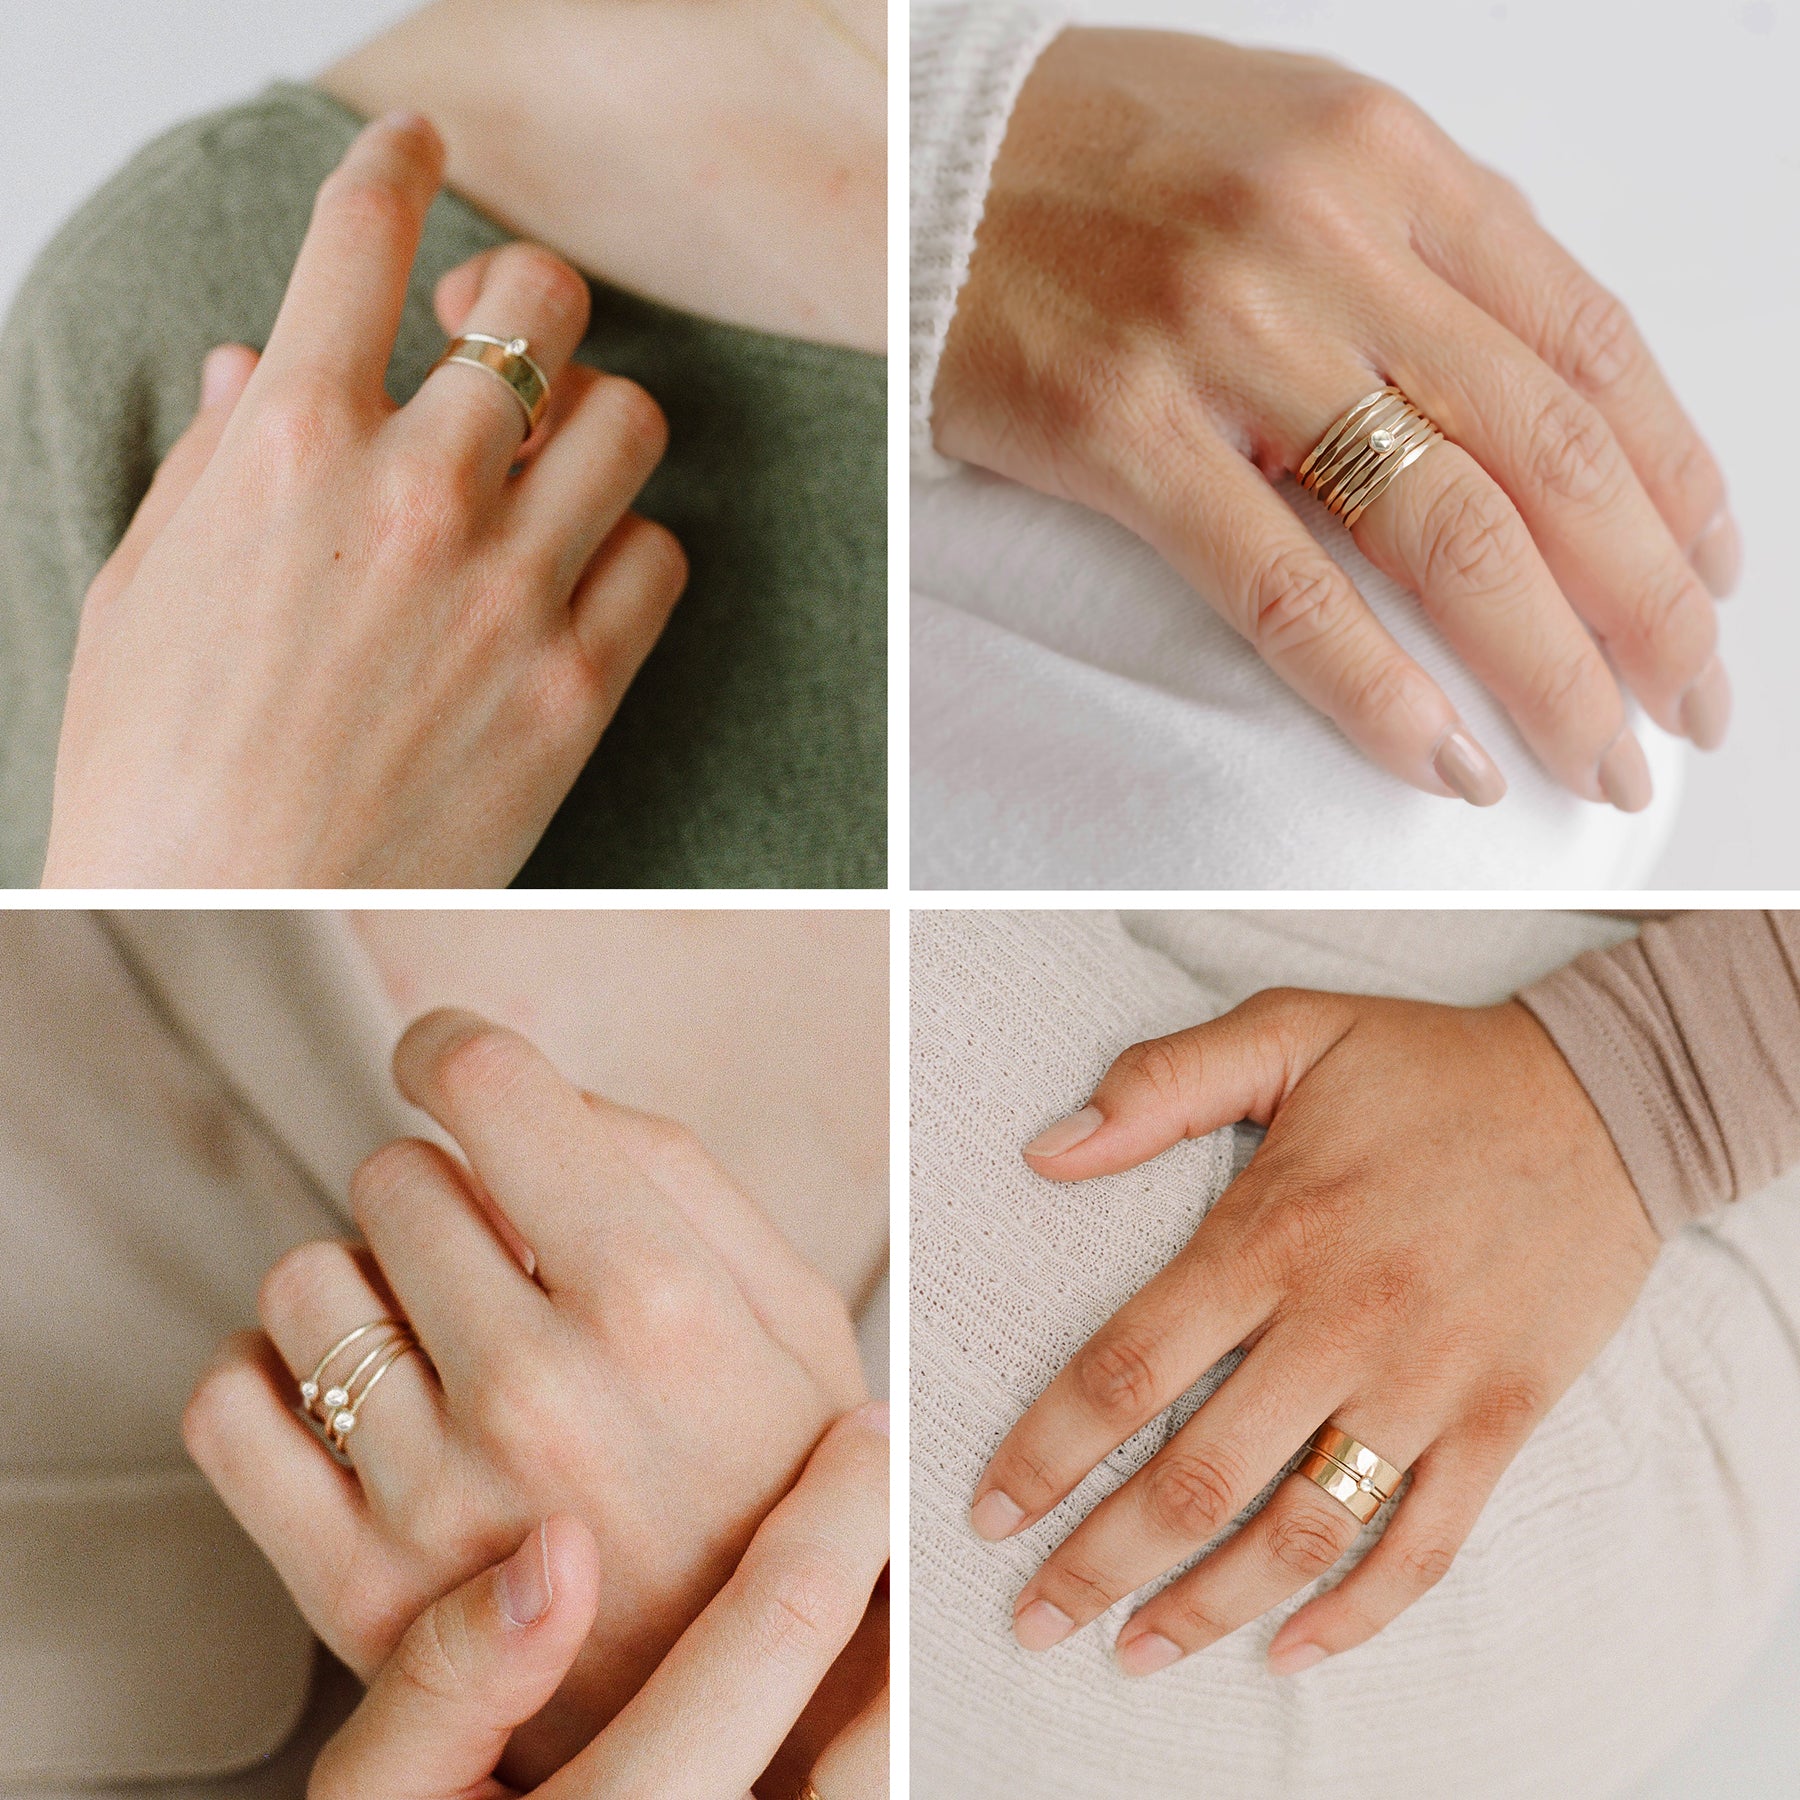 Stacking ring inspiration. Recycled gold rings made with pearls, white topaz and gold. Thin delicate rings.